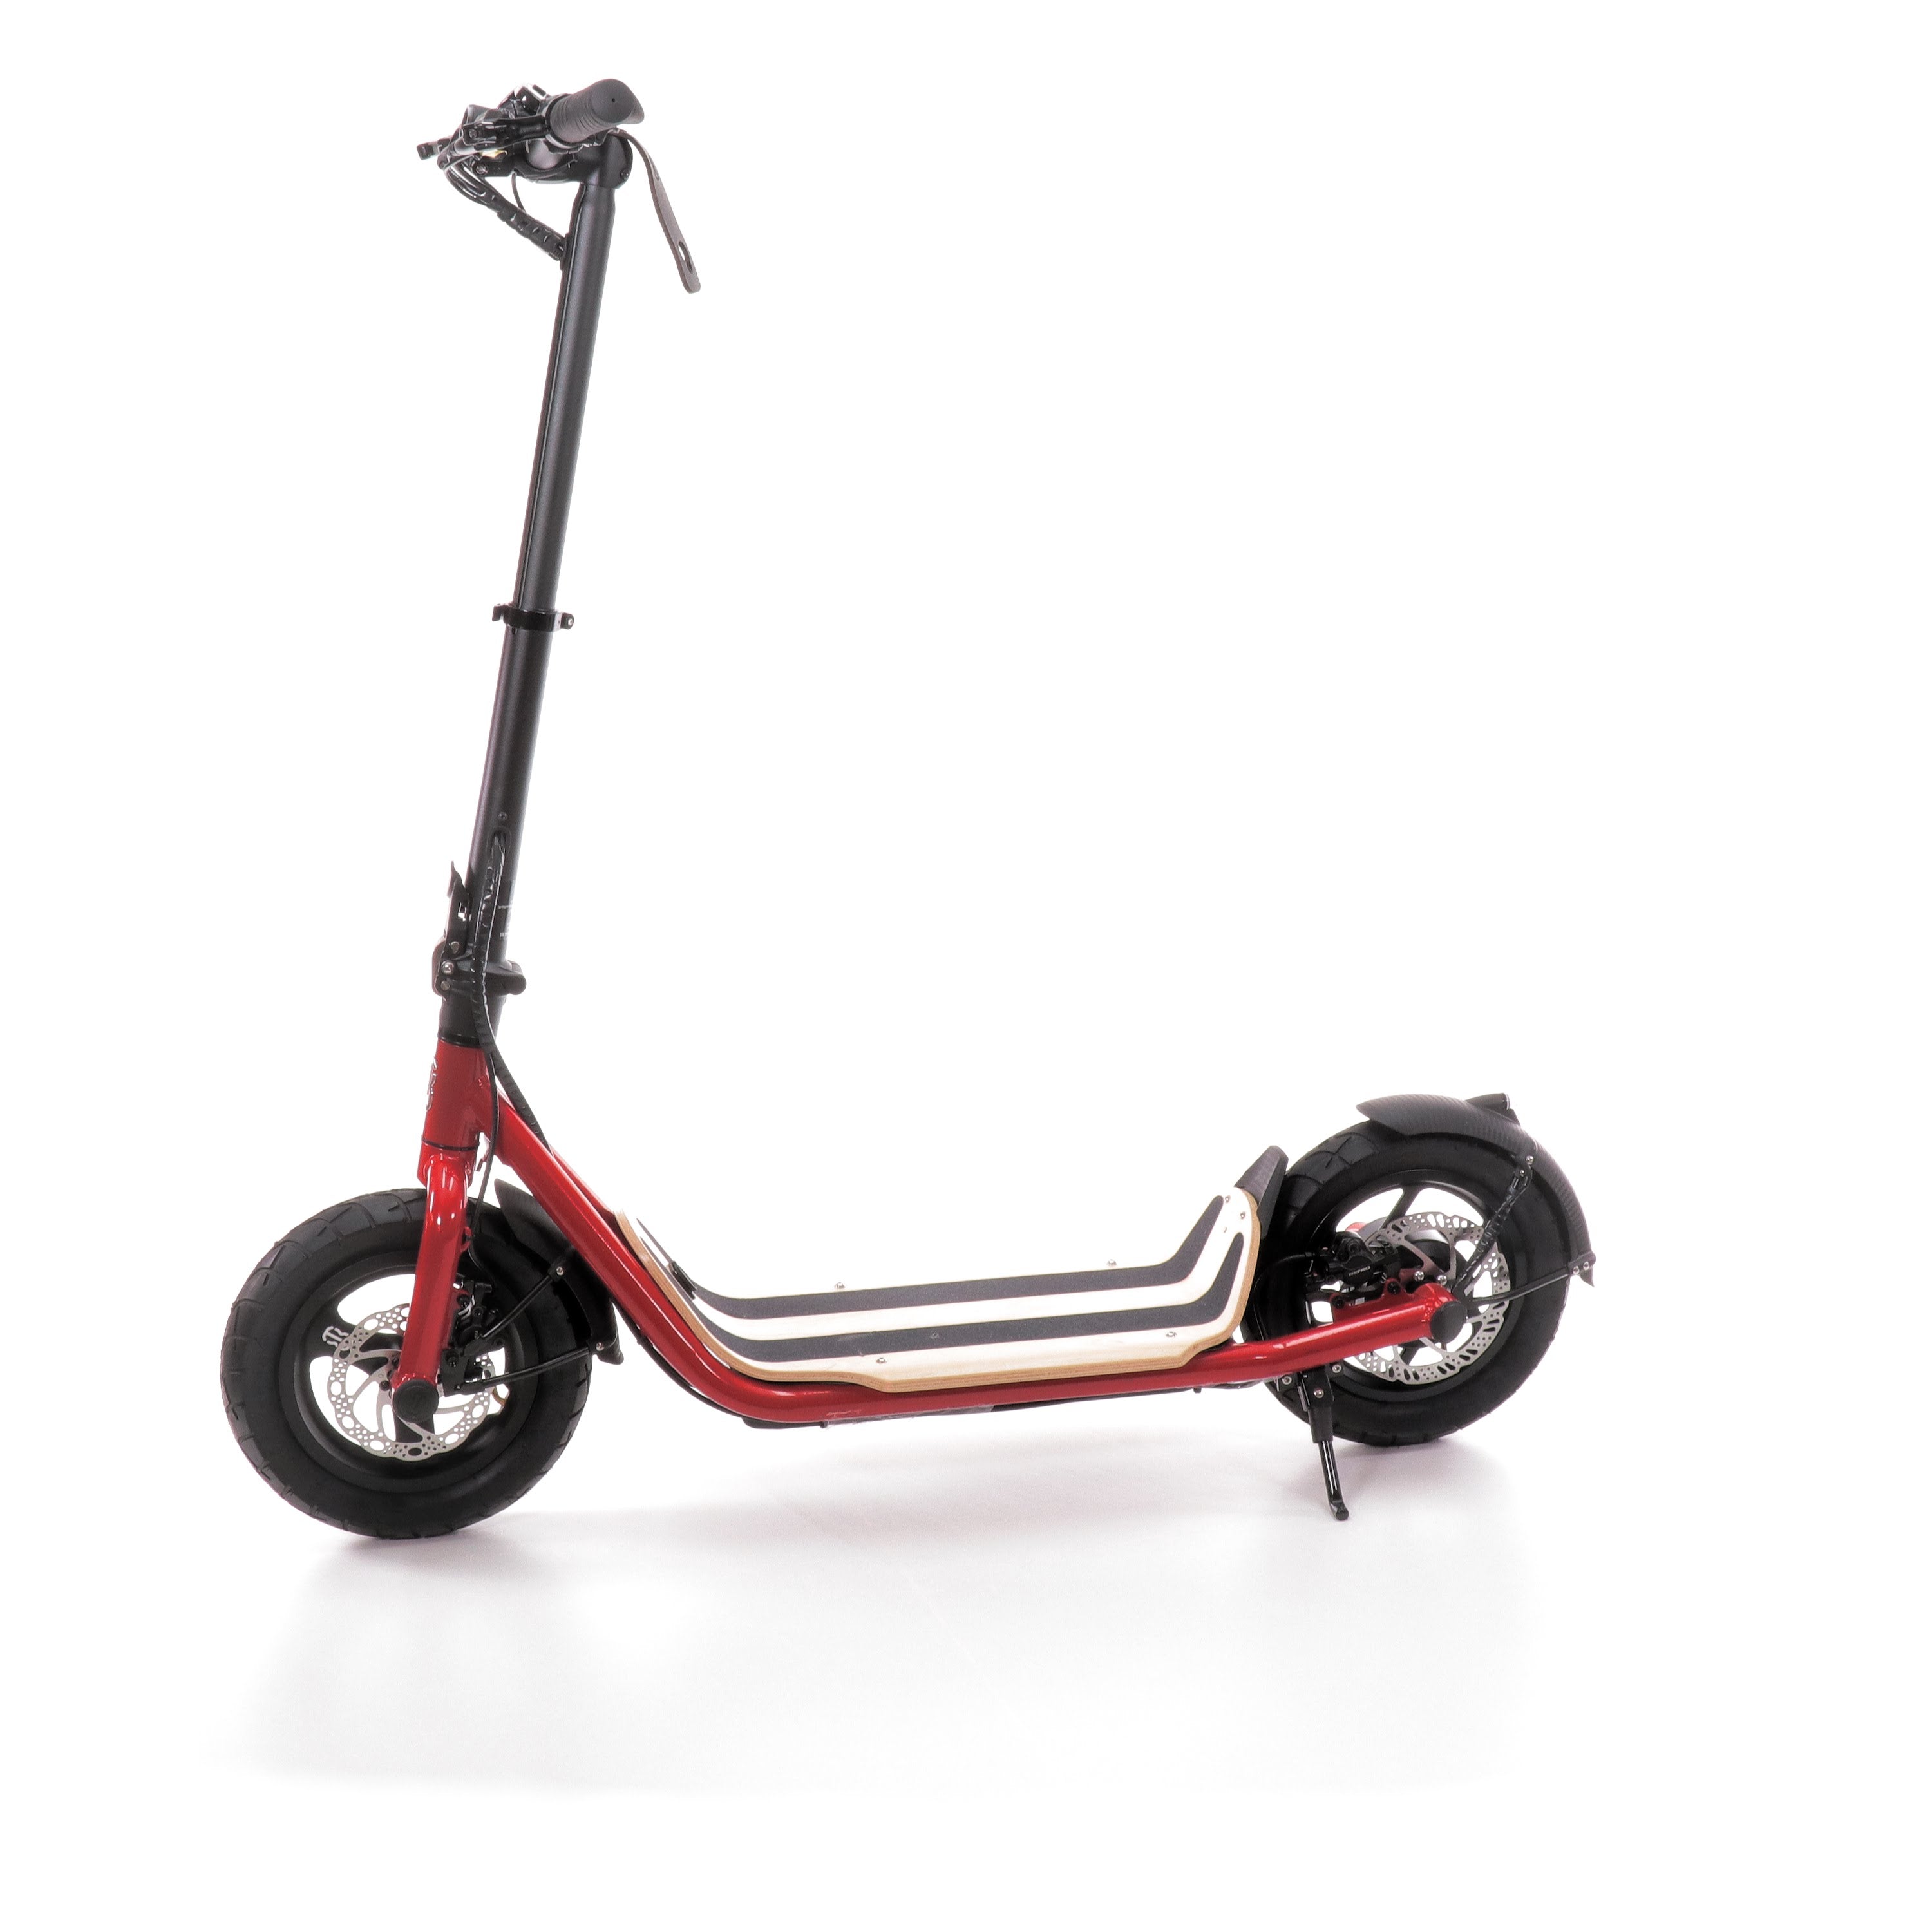 8TEV B12 Roam Electric Scooter Commuter/City scooter 8TEV 